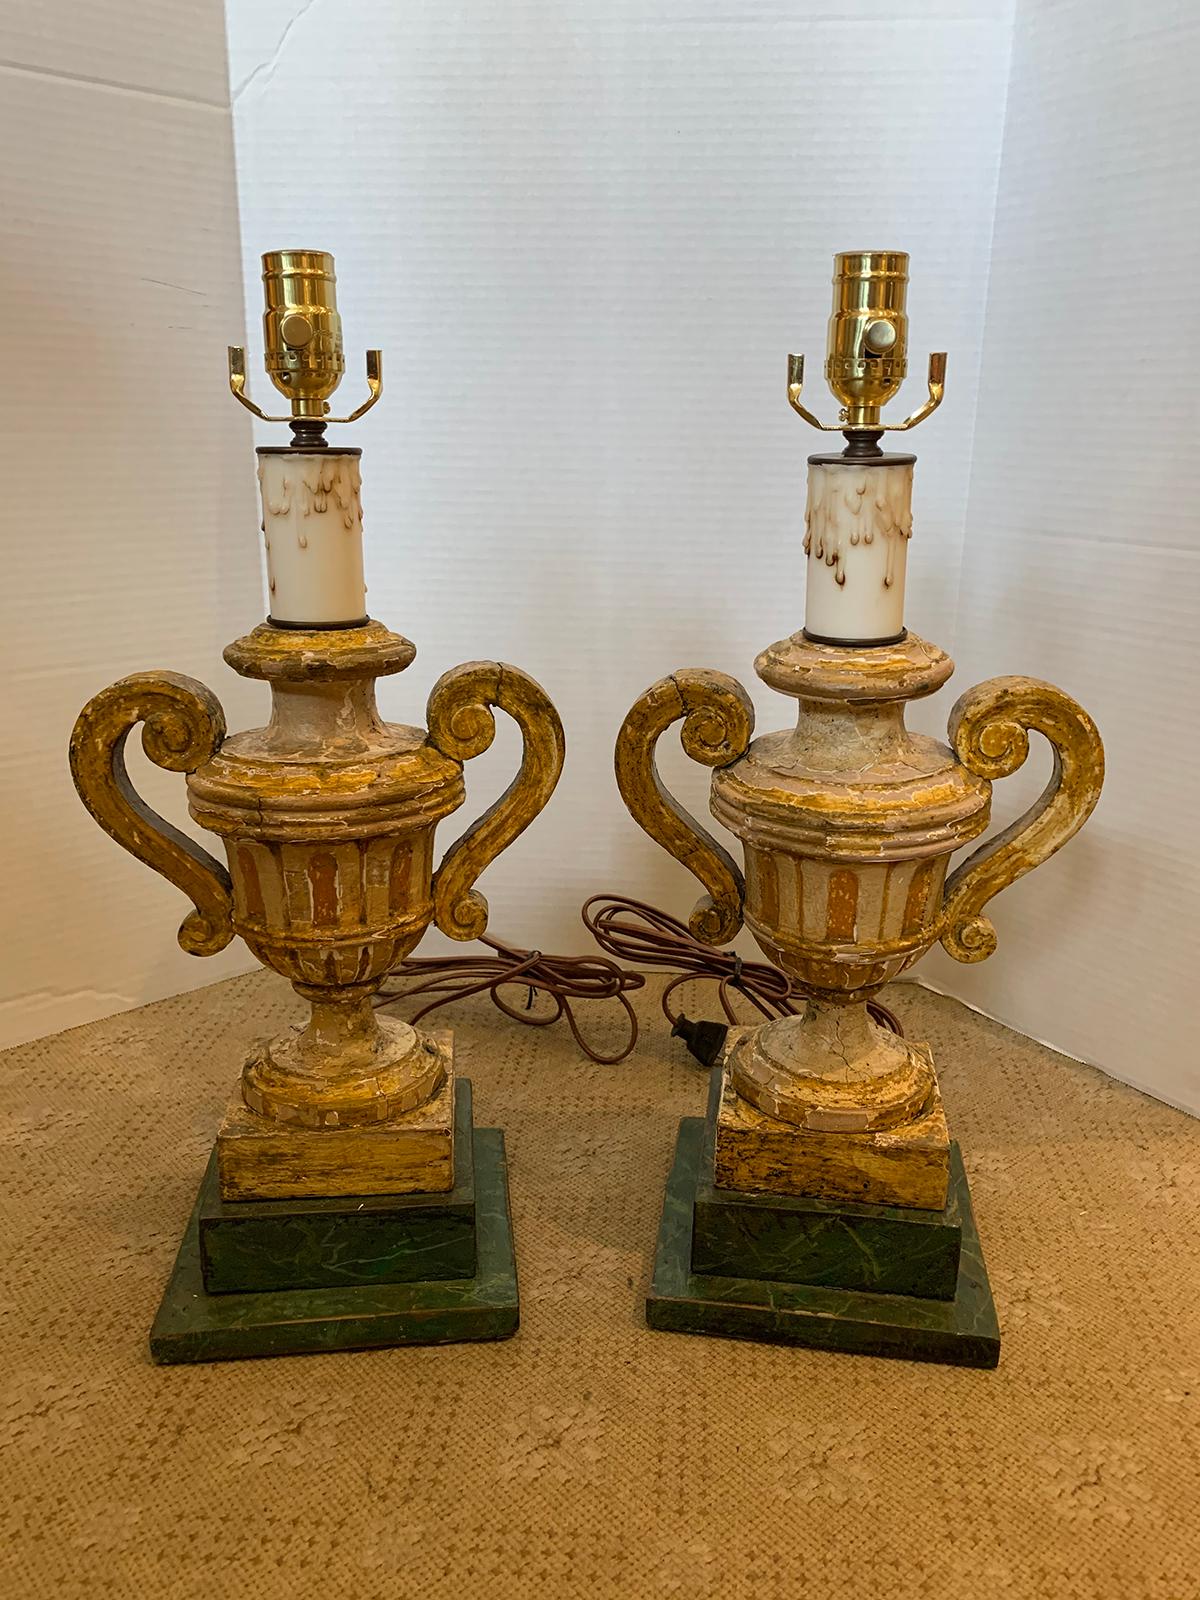 Pair of 18th-19th century Italian painted urns as lamps
New wiring.